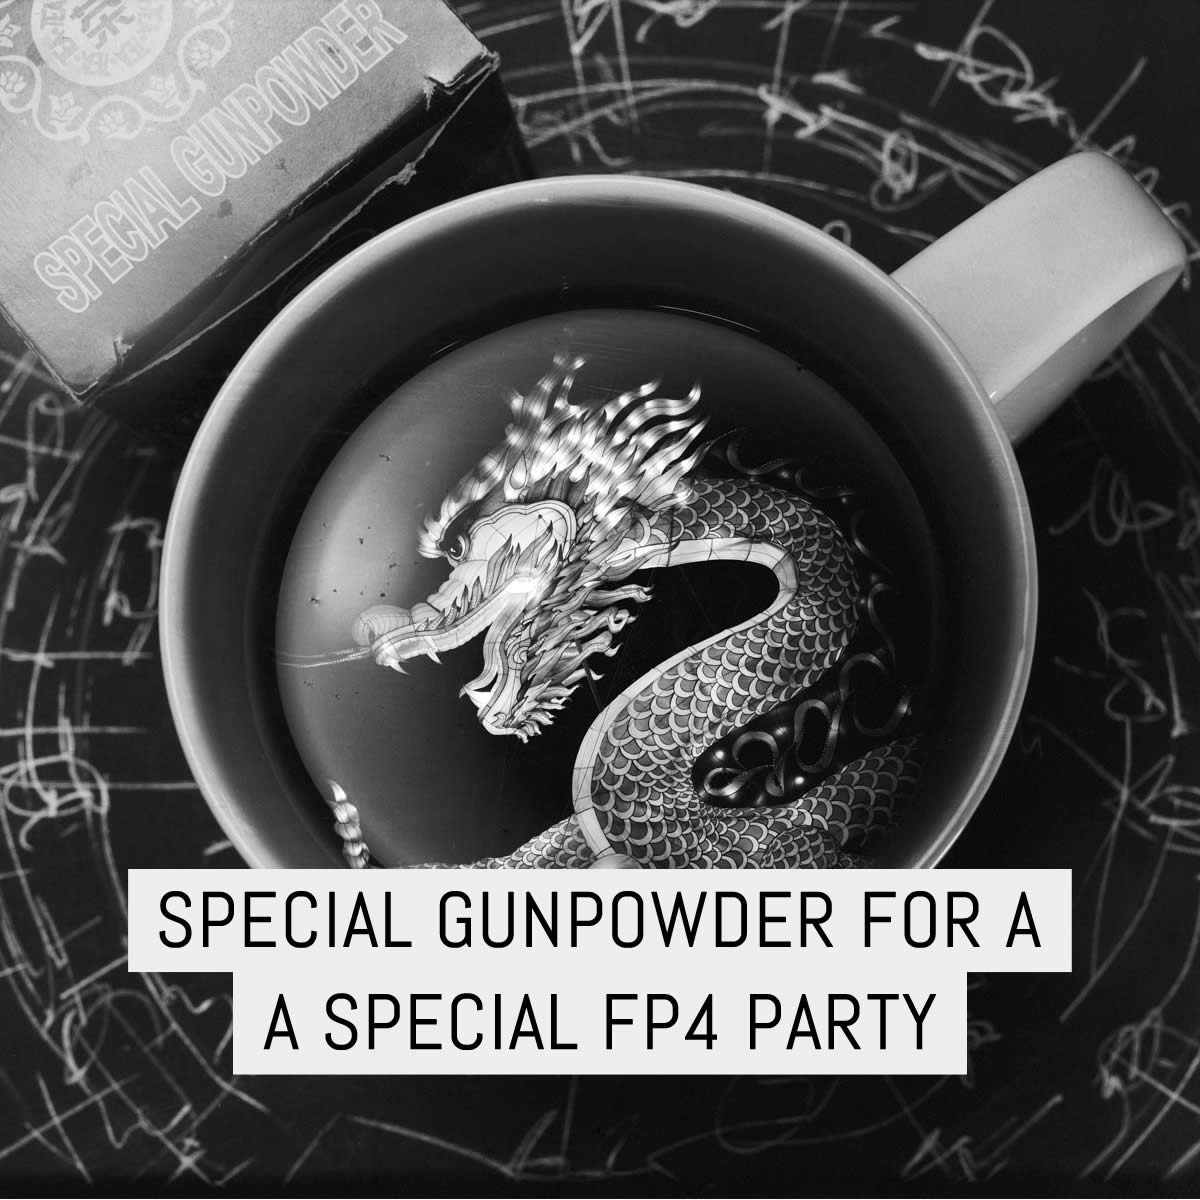 Special Gunpowder for a Special FP4 Party